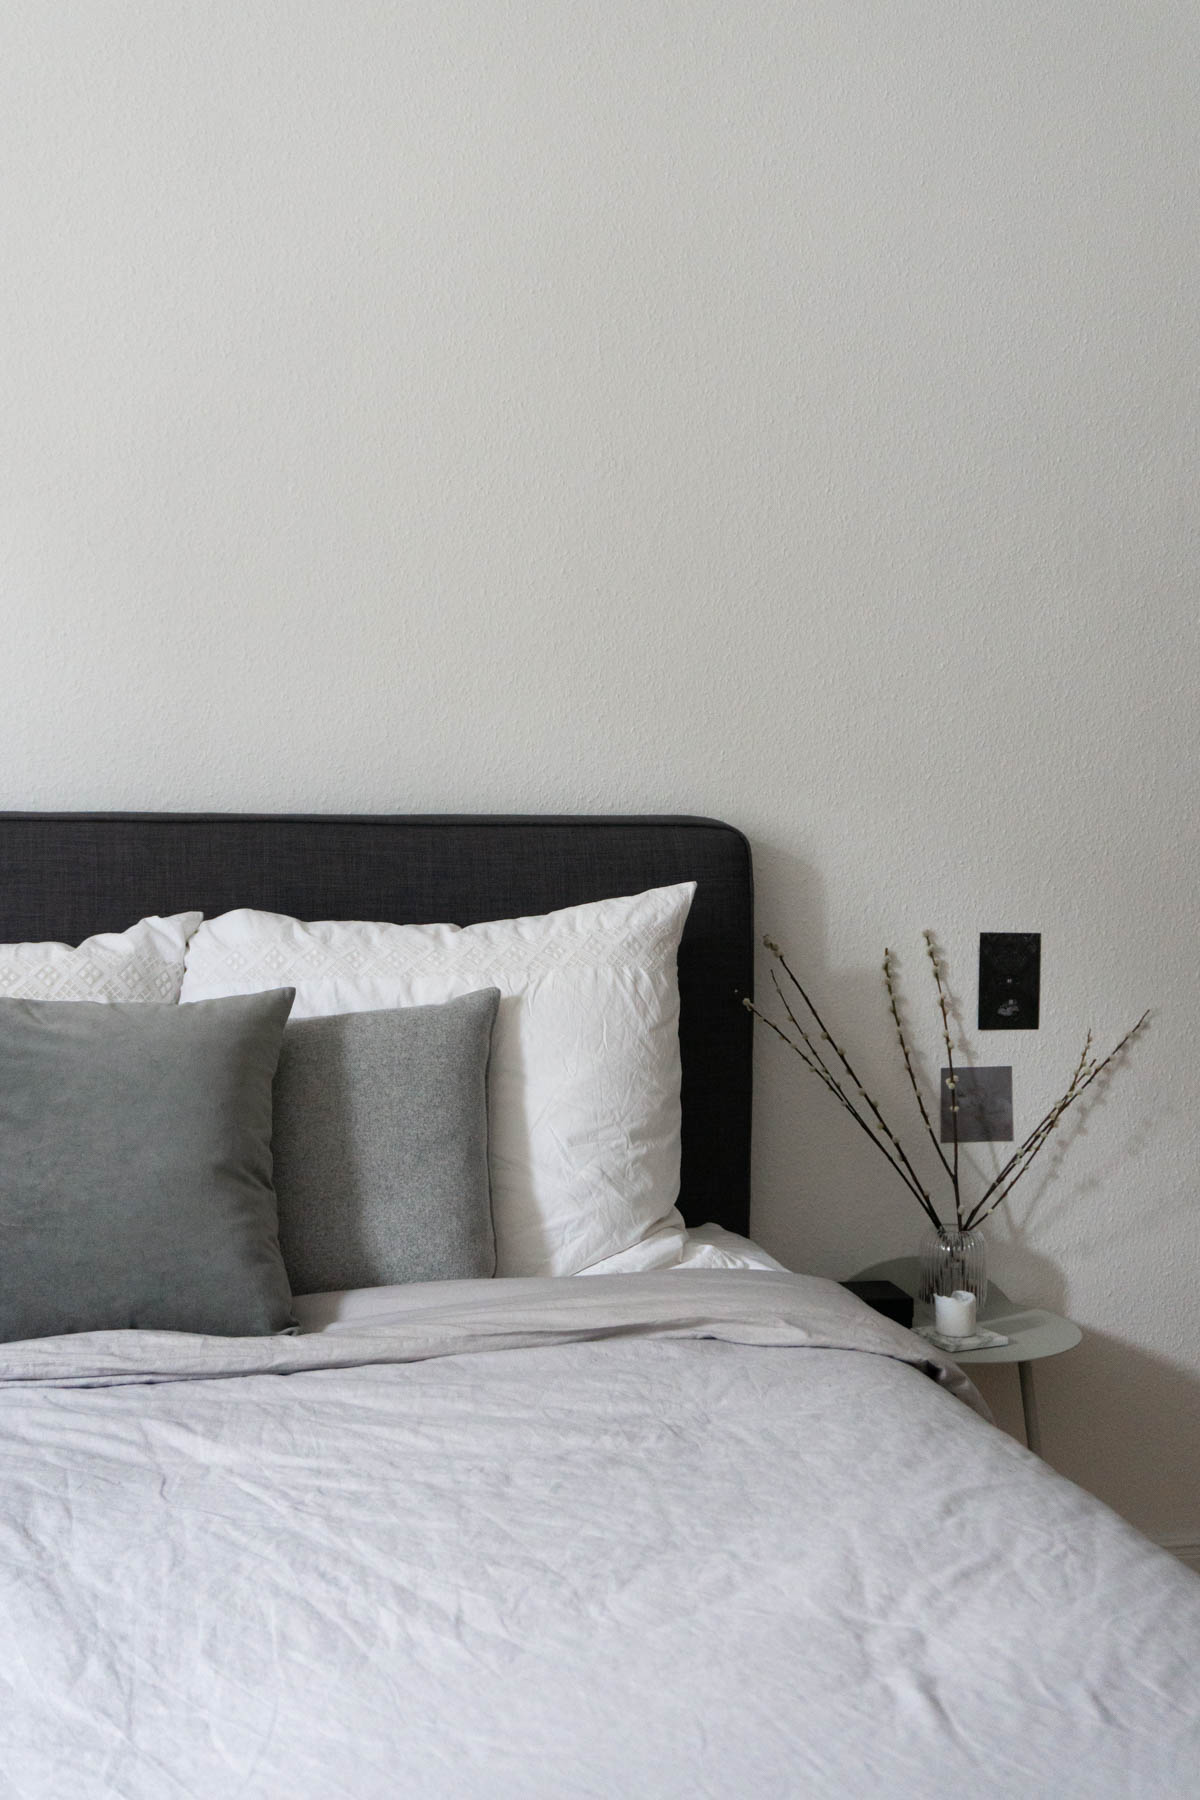 Calming Scandinavian Bedroom Details - Grey and White - RG Daily Blog